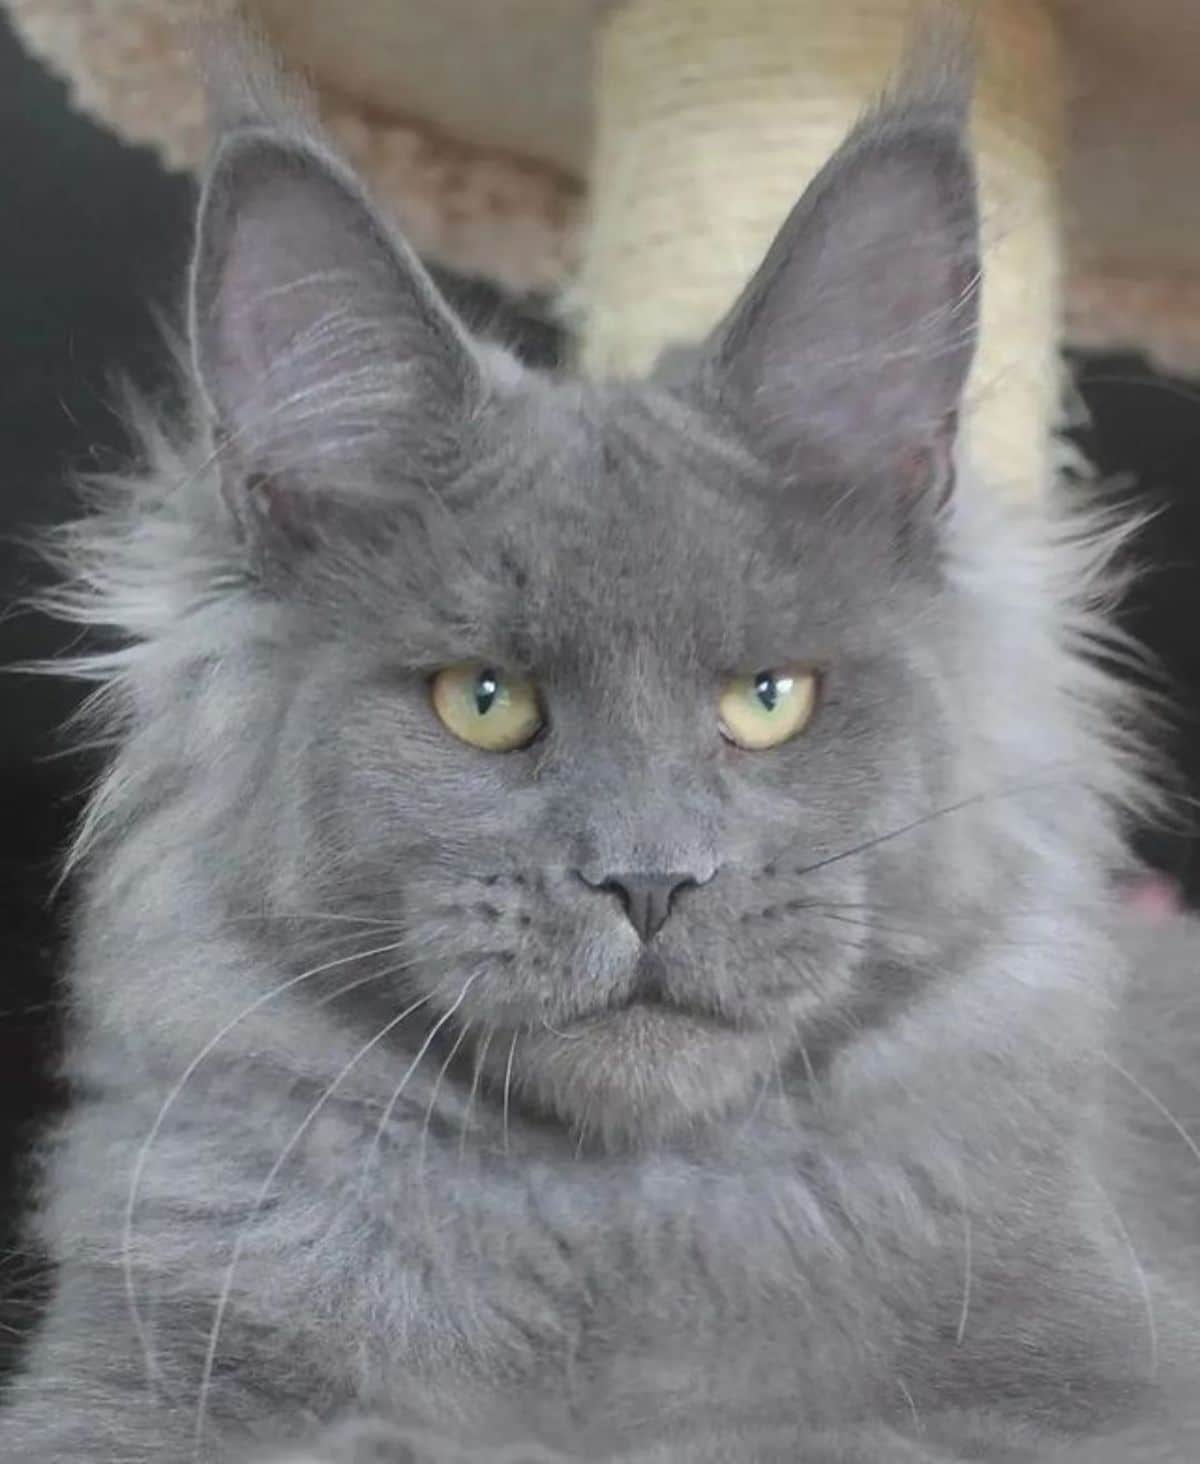 A close-up of a gray maine coon face.